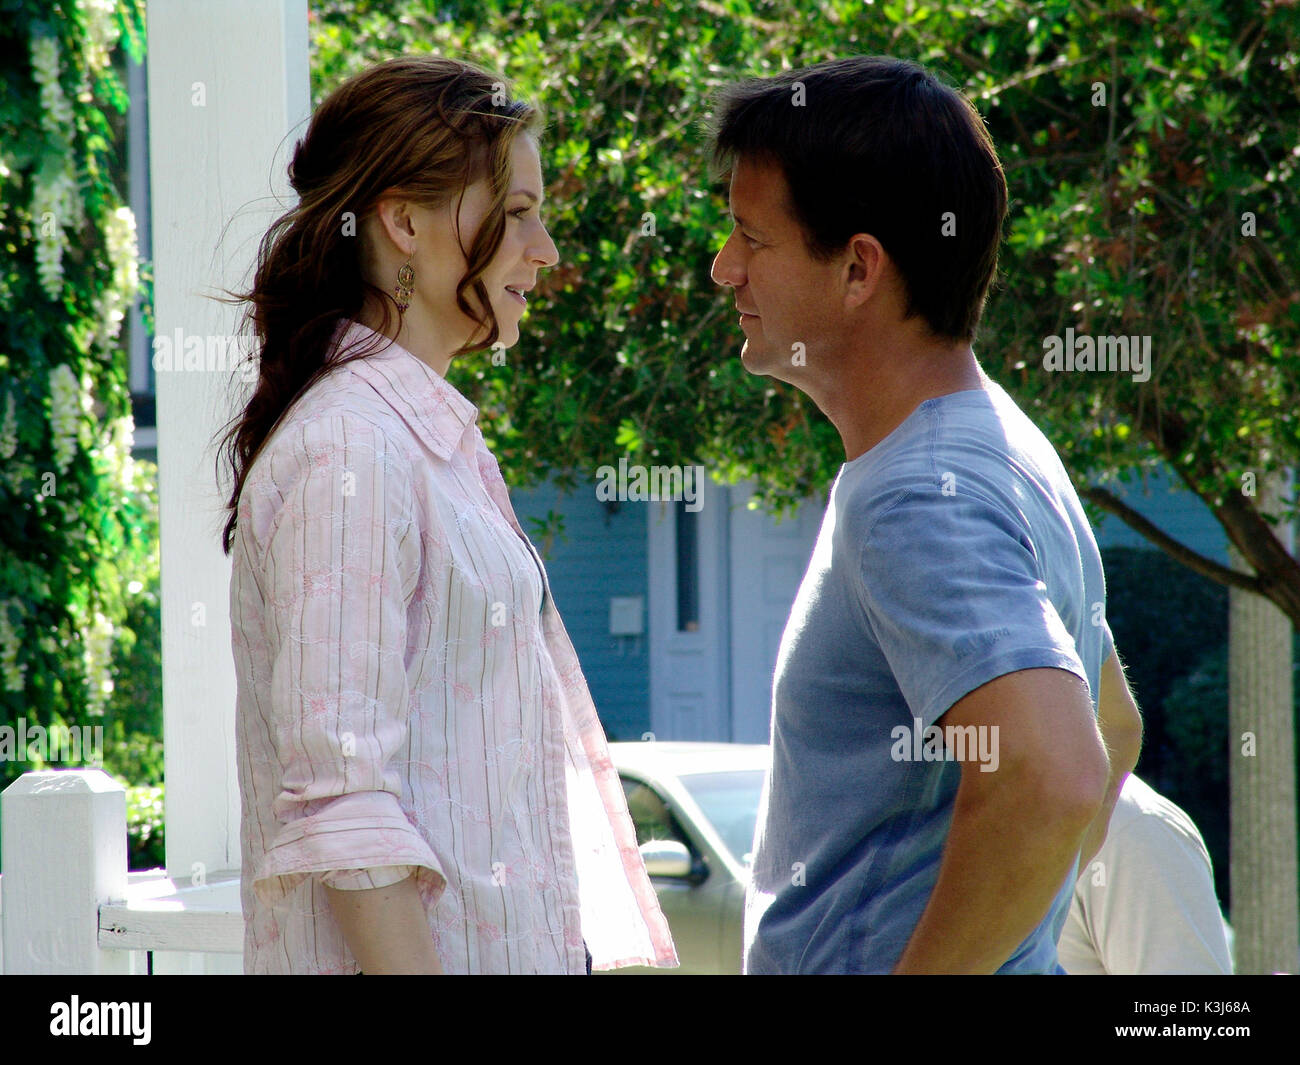 DESPERATE HOUSEWIVES  Series#1/Episode#7/Anything You Can Do HEATHER STEPHENS as Kendra Taylor, JAMES DENTON as Mike Delfino DESPERATE HOUSEWIVES Stock Photo